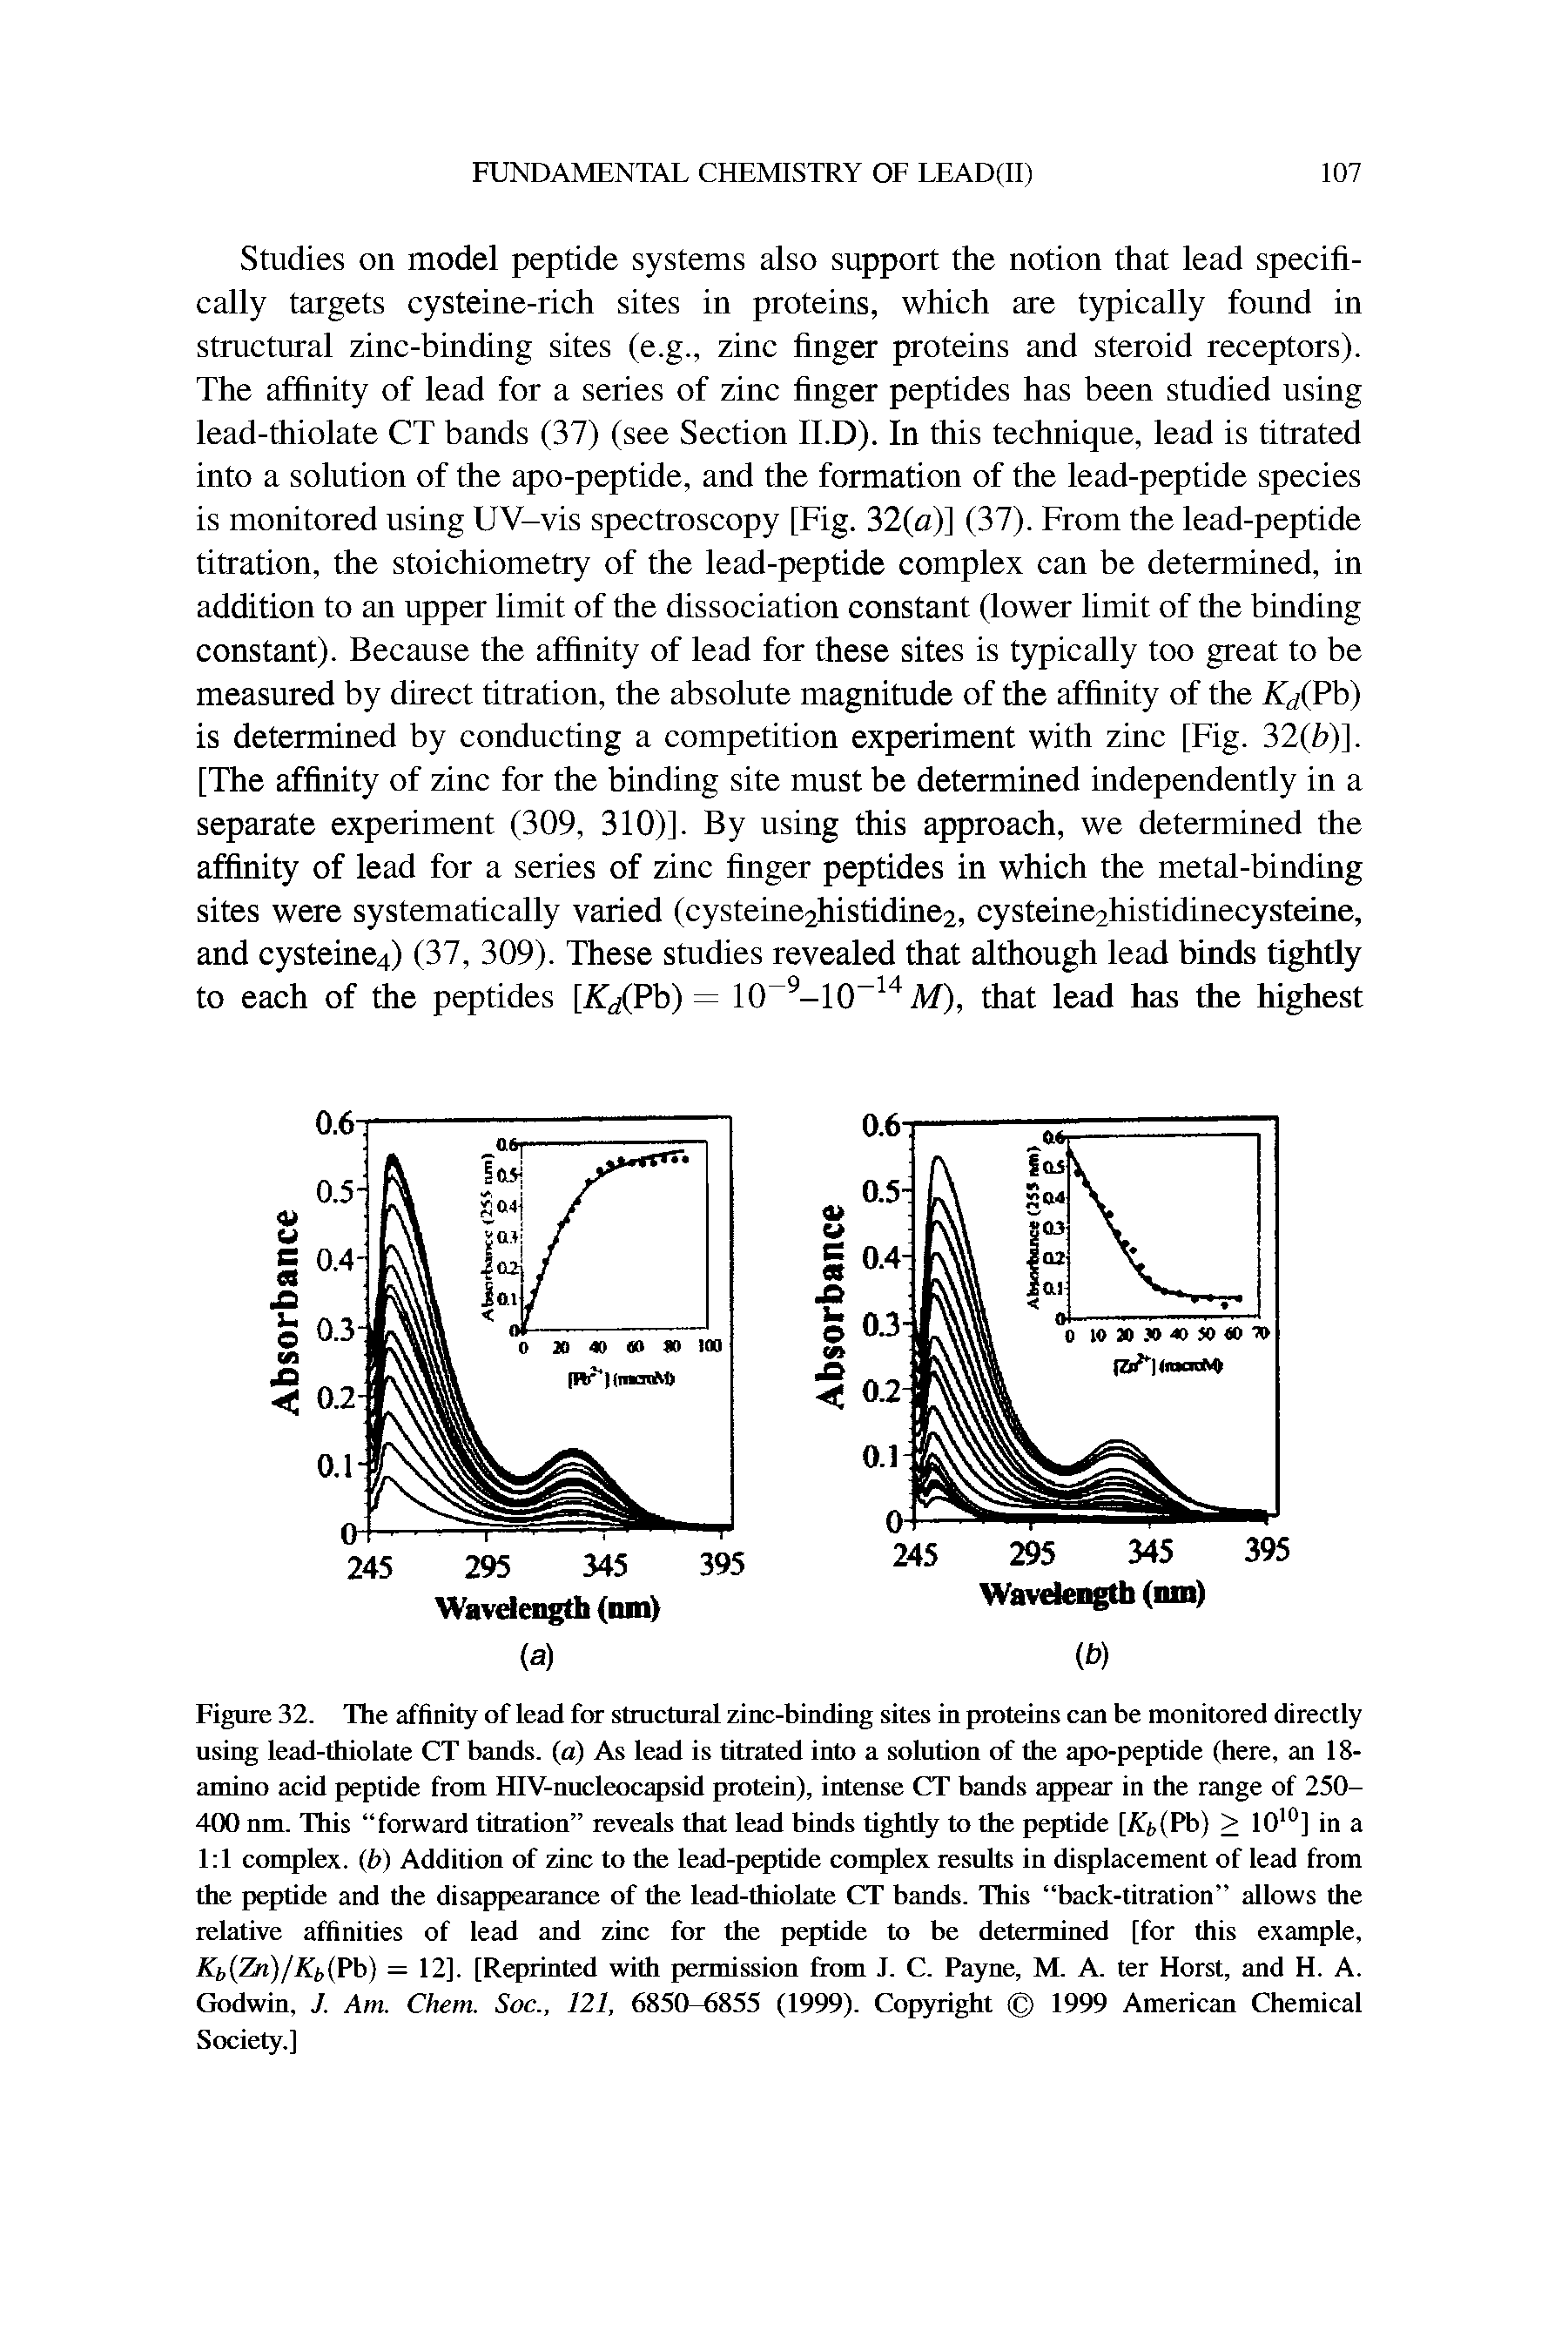 Figure 32. The affinity of lead for structural zinc-binding sites in proteins can be monitored directly using lead-thiolate CT bands, (a) As lead is titrated into a solution of the apo-peptide (here, an 18-amino acid peptide from HIV-nucleocapsid protein), intense CT bands appear in the range of 250-4(X) nm. This forward titration reveals that lead binds tightly to the peptide [/ (Pb) > 10 ] in a 1 1 complex, b) Addition of zinc to the lead-peptide complex results in displacement of lead from the peptide and the disappearance of the lead-thiolate CT bands. This back-titration allows the relative affinities of lead and zinc for the peptide to be determined [for this example, KbiZn)/Kiyi h) = 12]. [Reprinted with permission from J. C. Payne, M. A. ter Horst, and H. A. Godwin, J. Am. Chem. Soc., 121, 6850-6855 (1999). Copyright 1999 American Chemical Society.]...